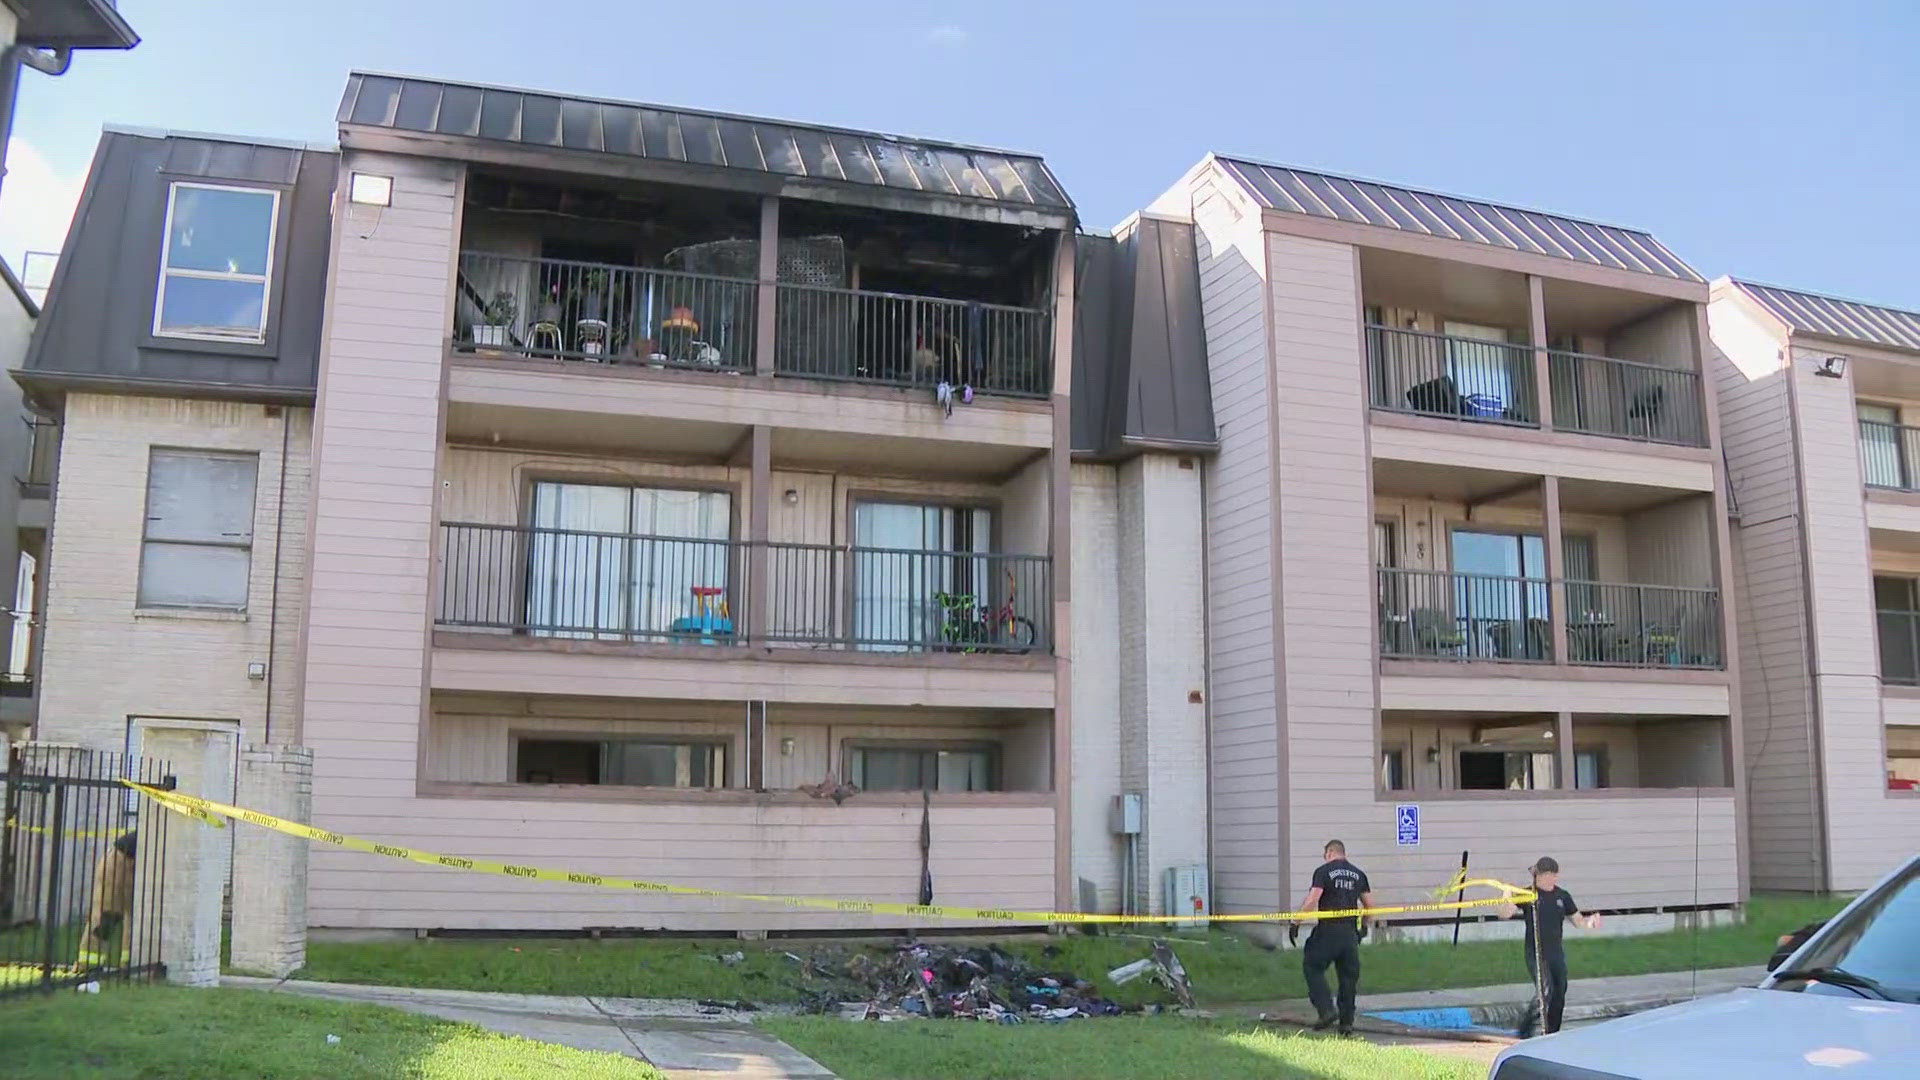 The Houston Fire Department said multiple people had to be rescued when a fire broke out at an apartment complex in the Greenspoint area on Monday.